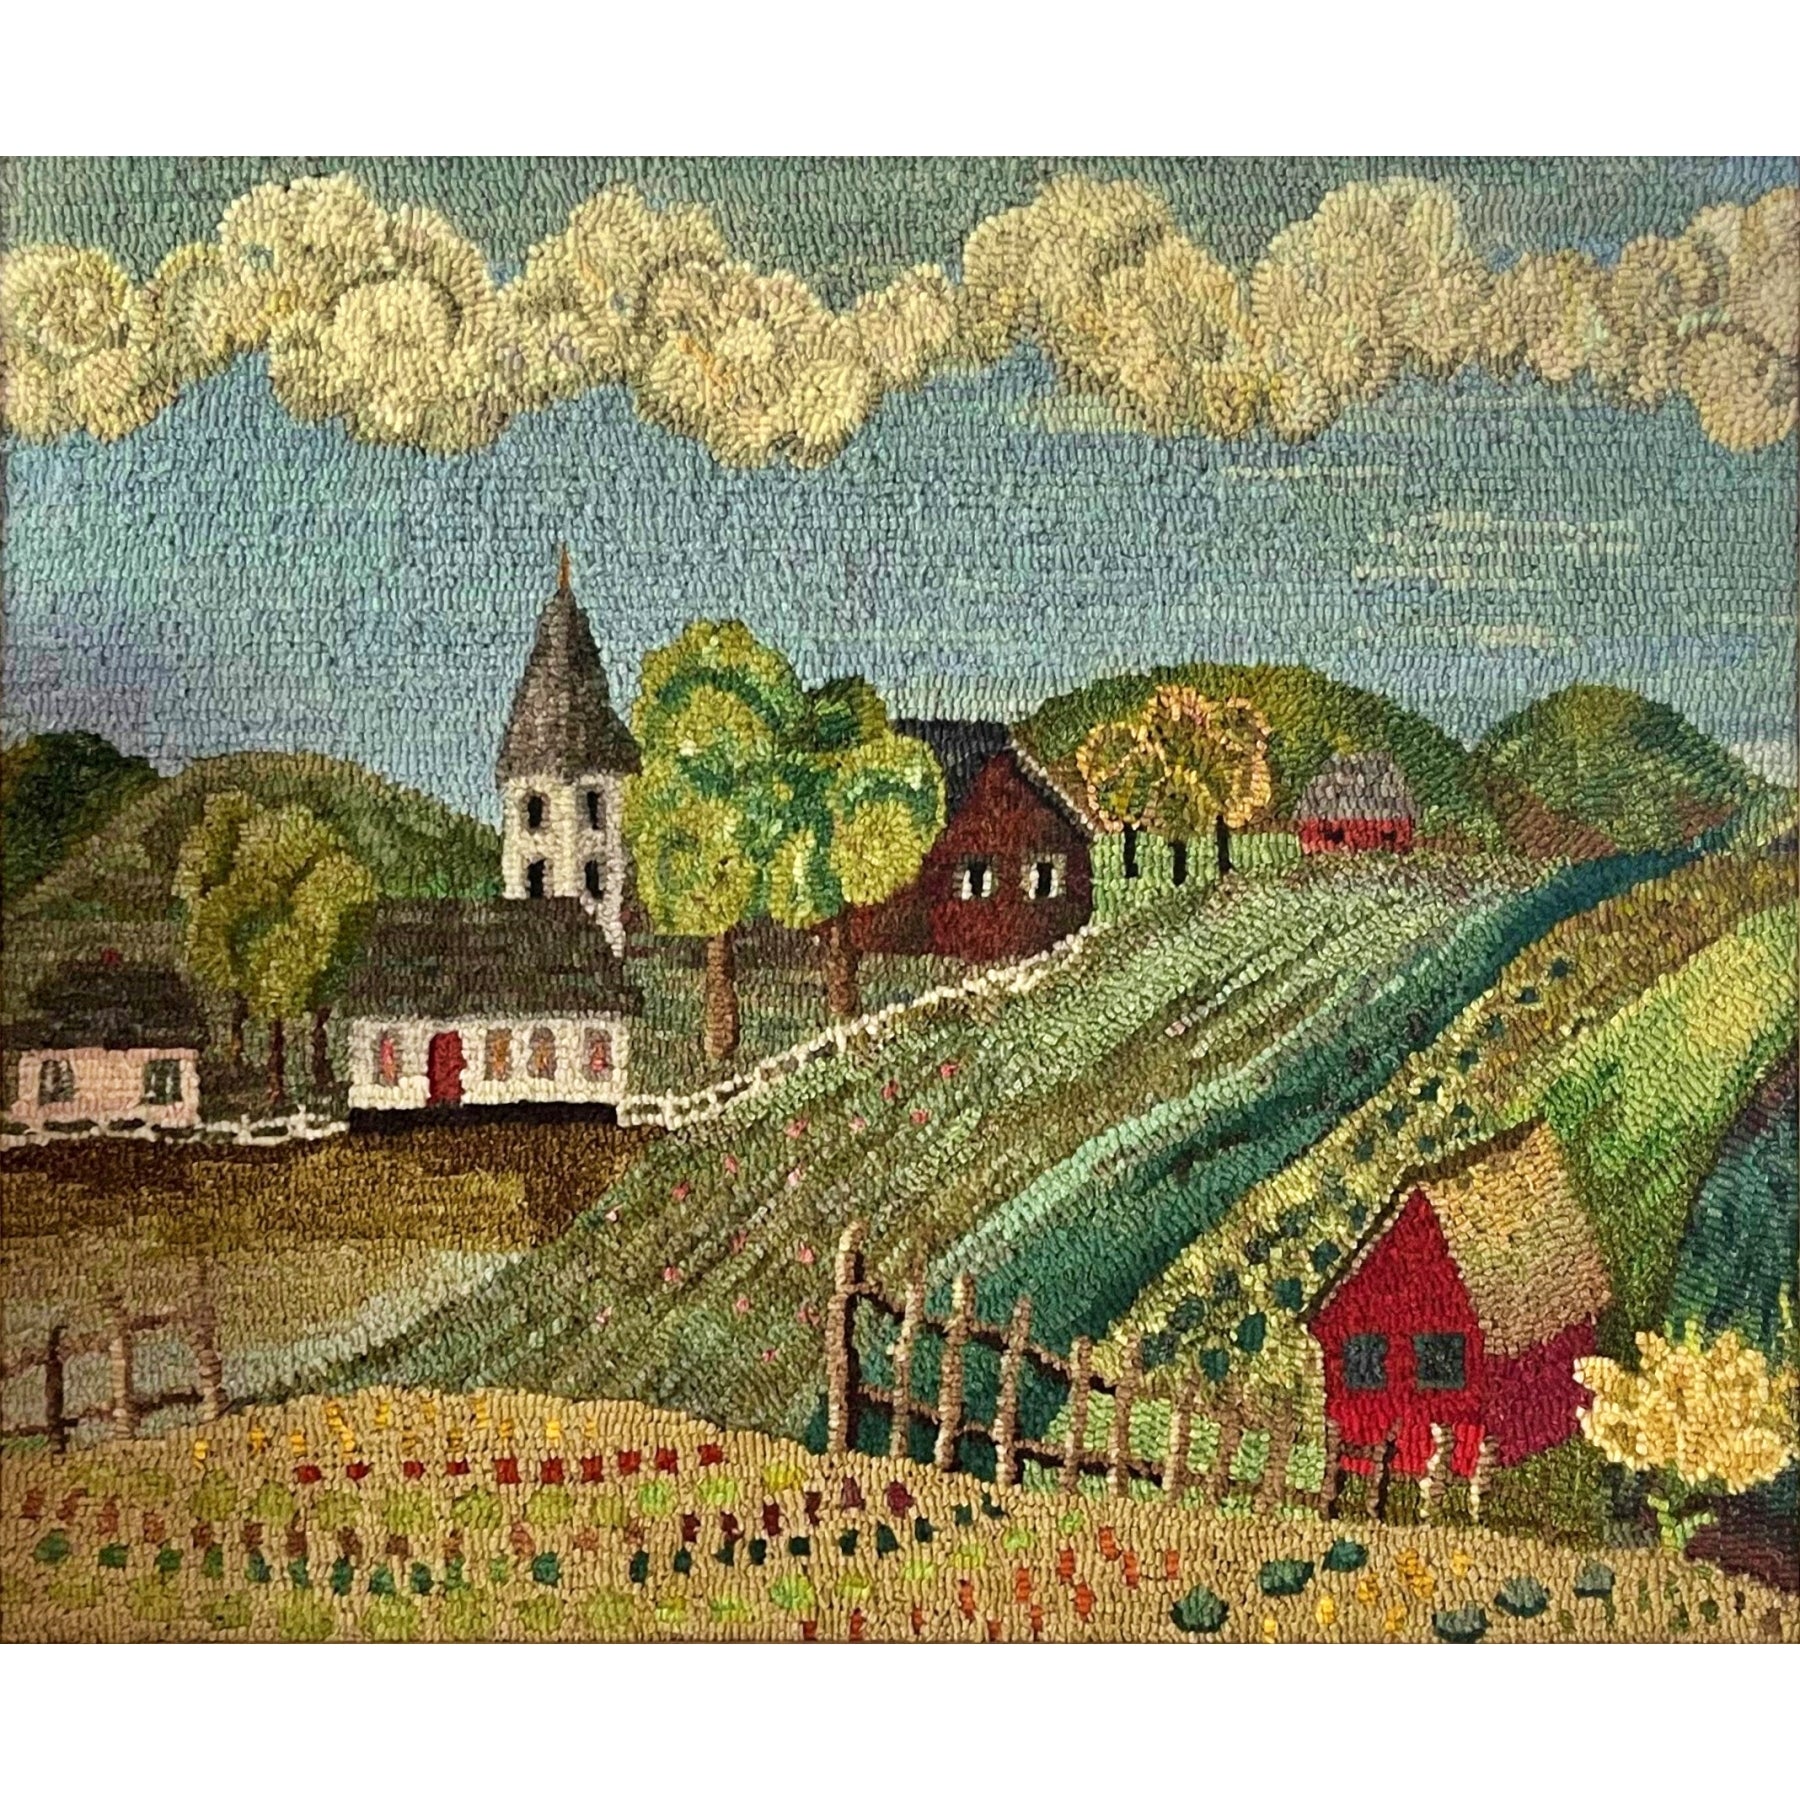 Ivan's Village, rug hooked by Jane McGown Flynn